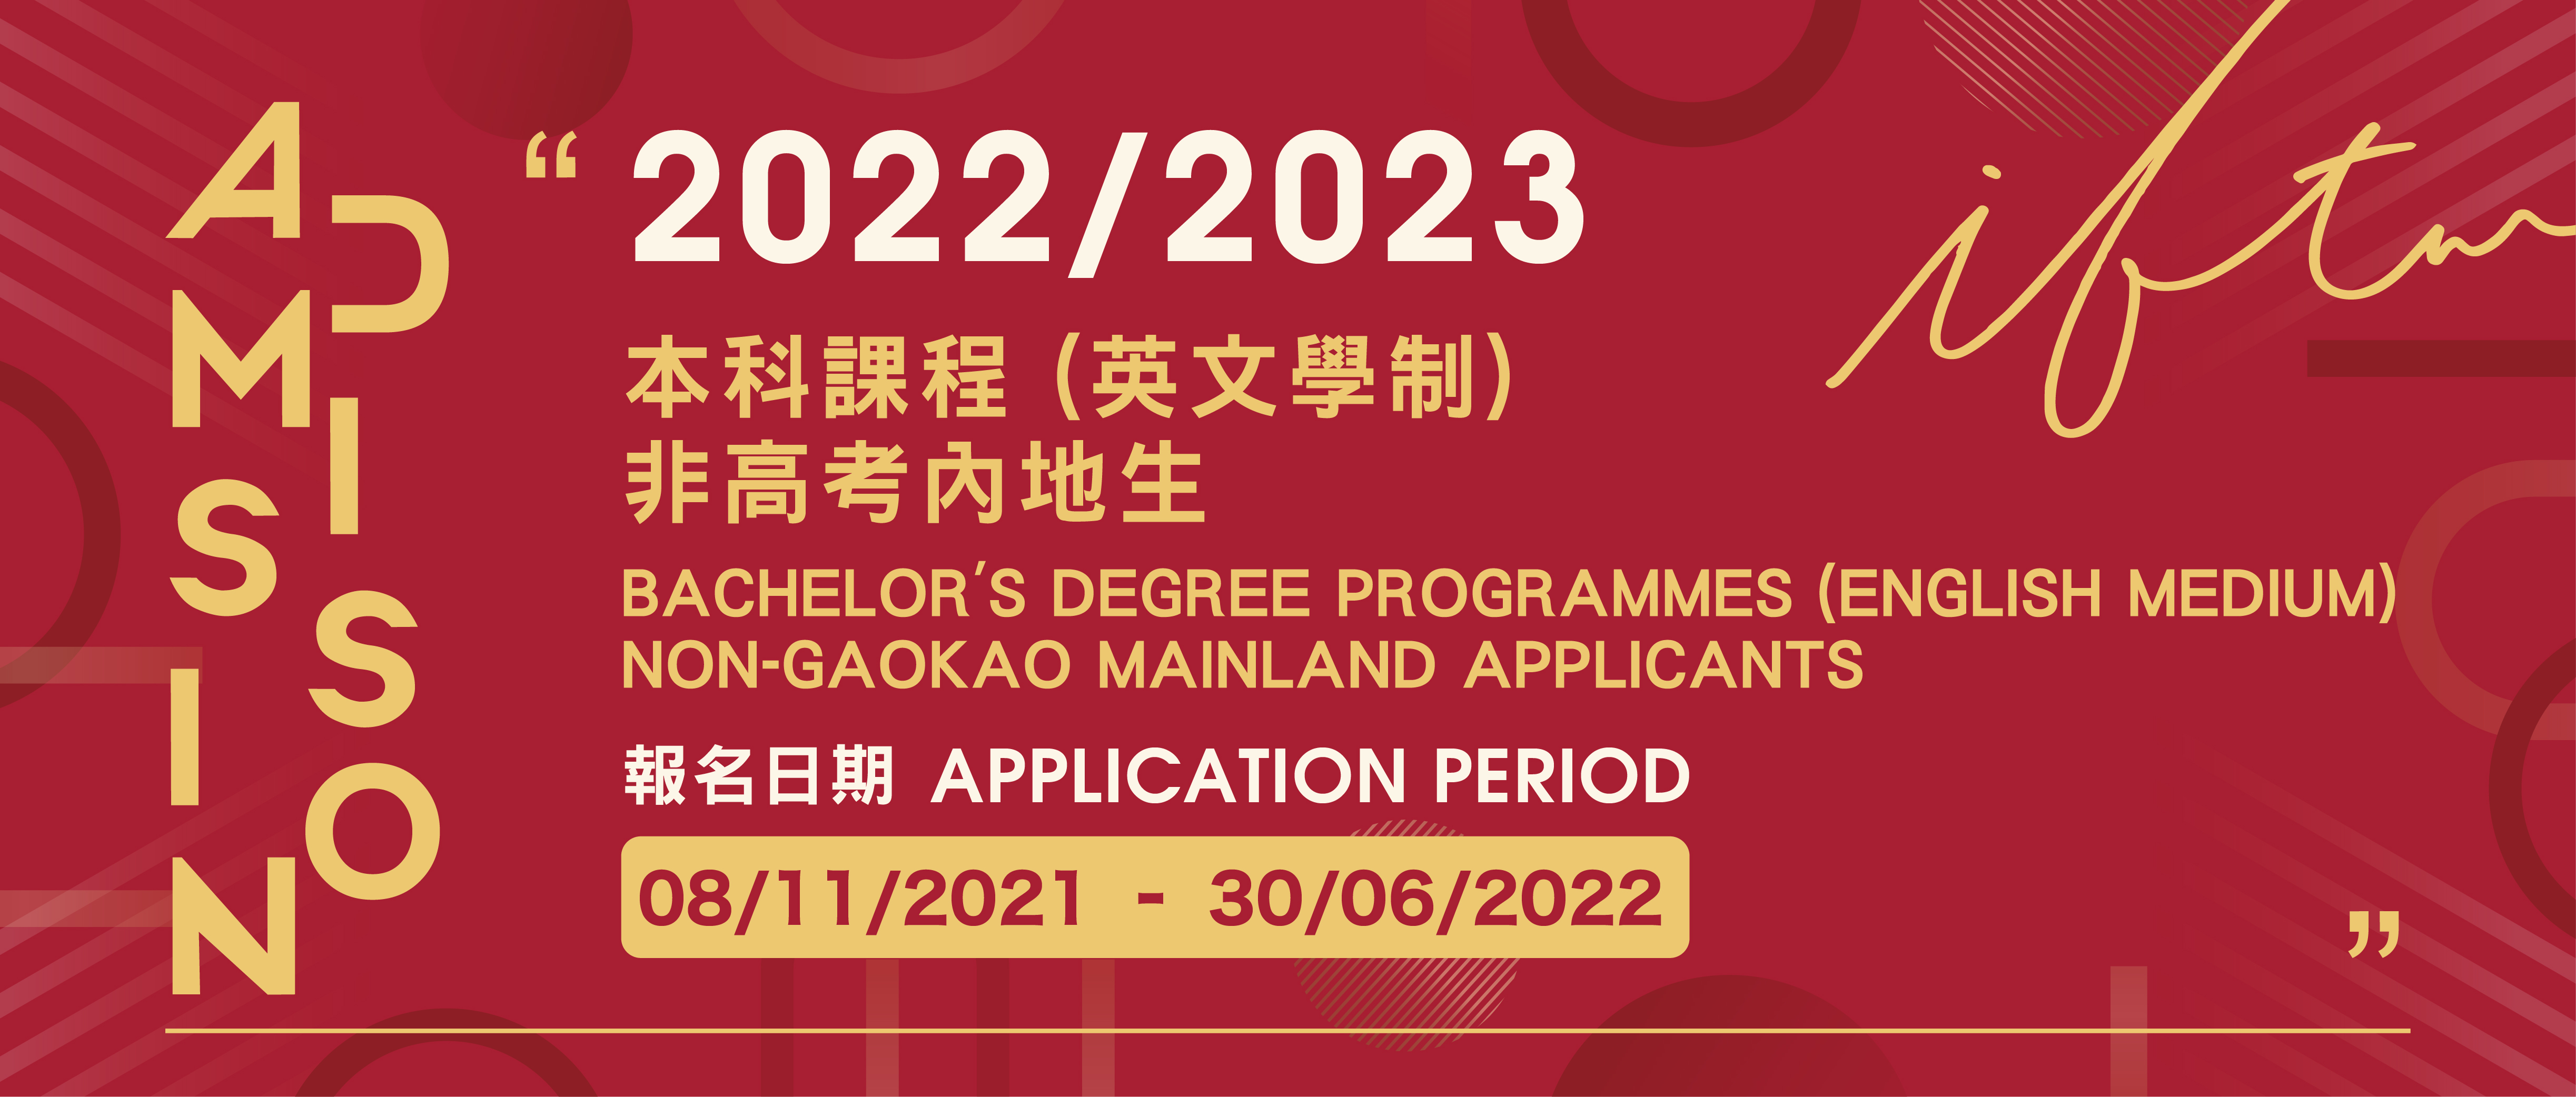 2021.11.10_3 website banners(Non-Gaokao applicants)_output